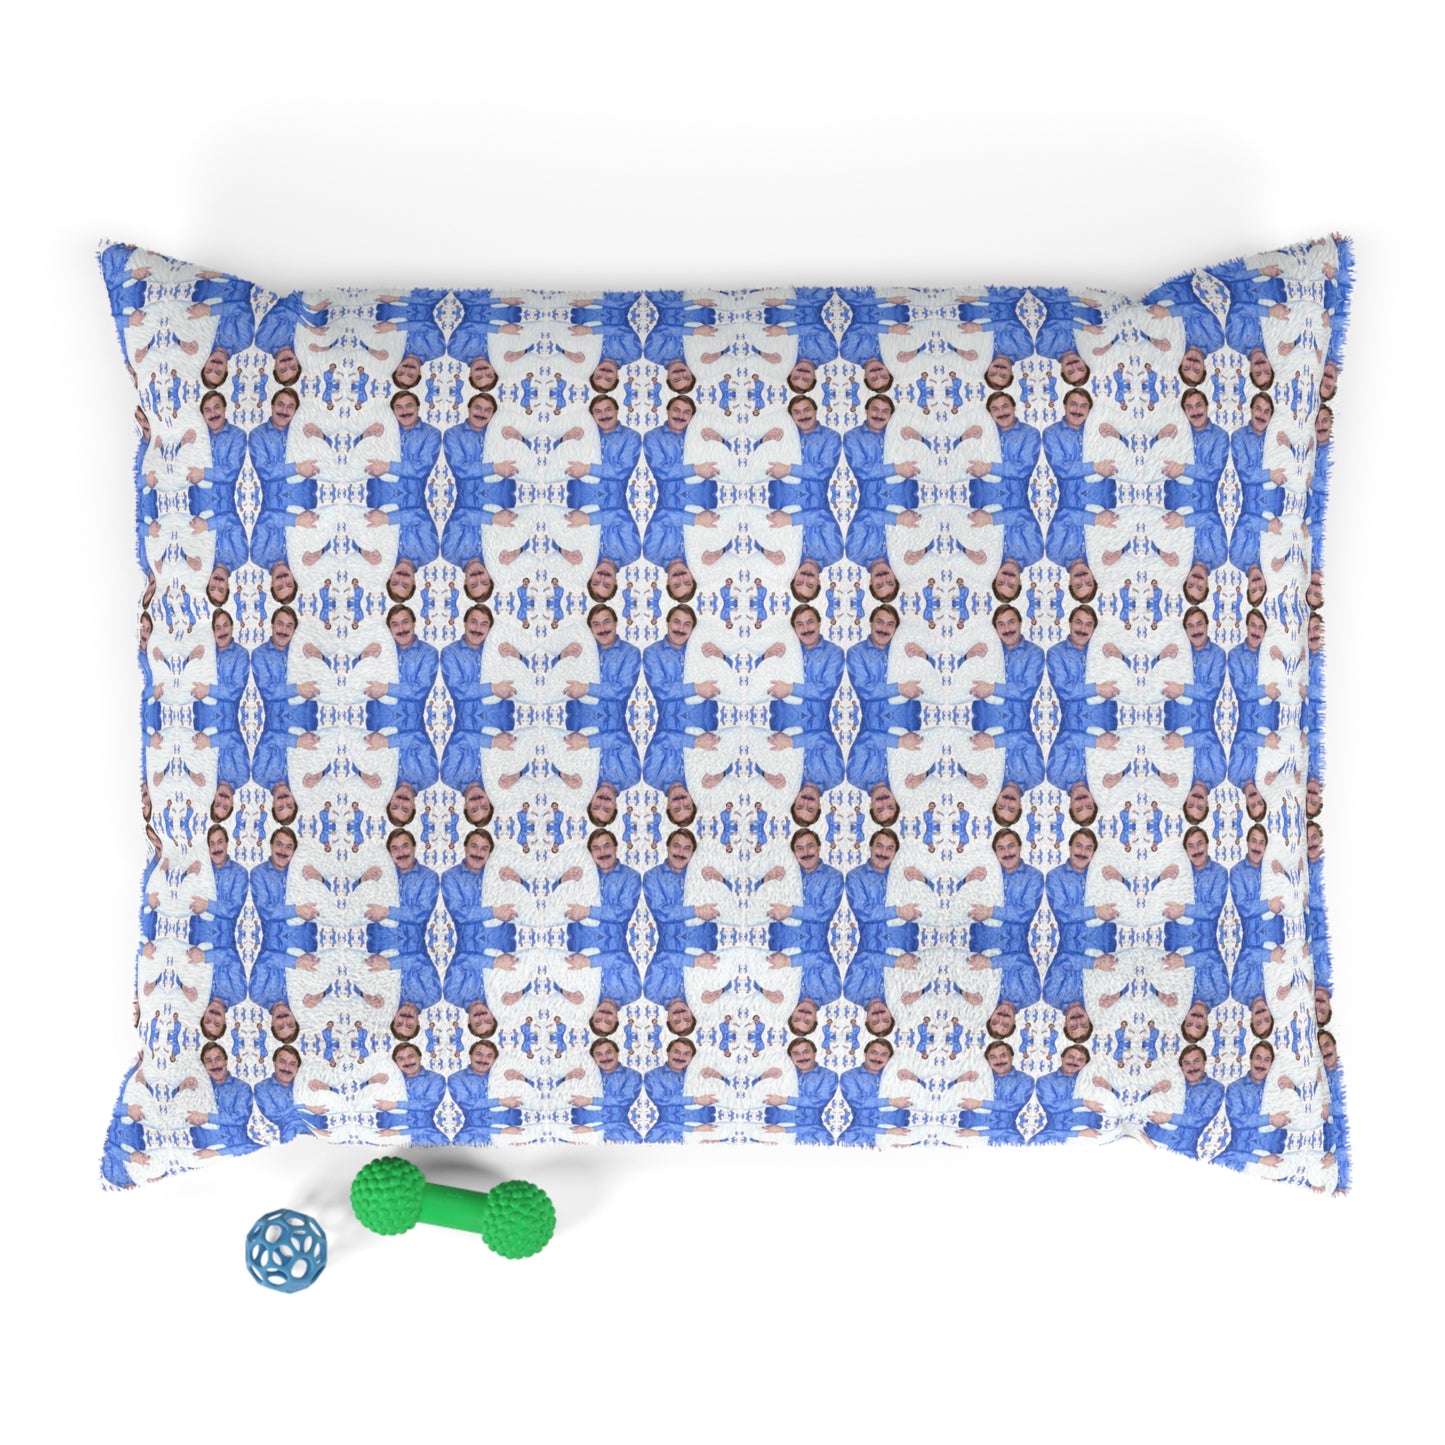 The Pillow Master Pet Bed